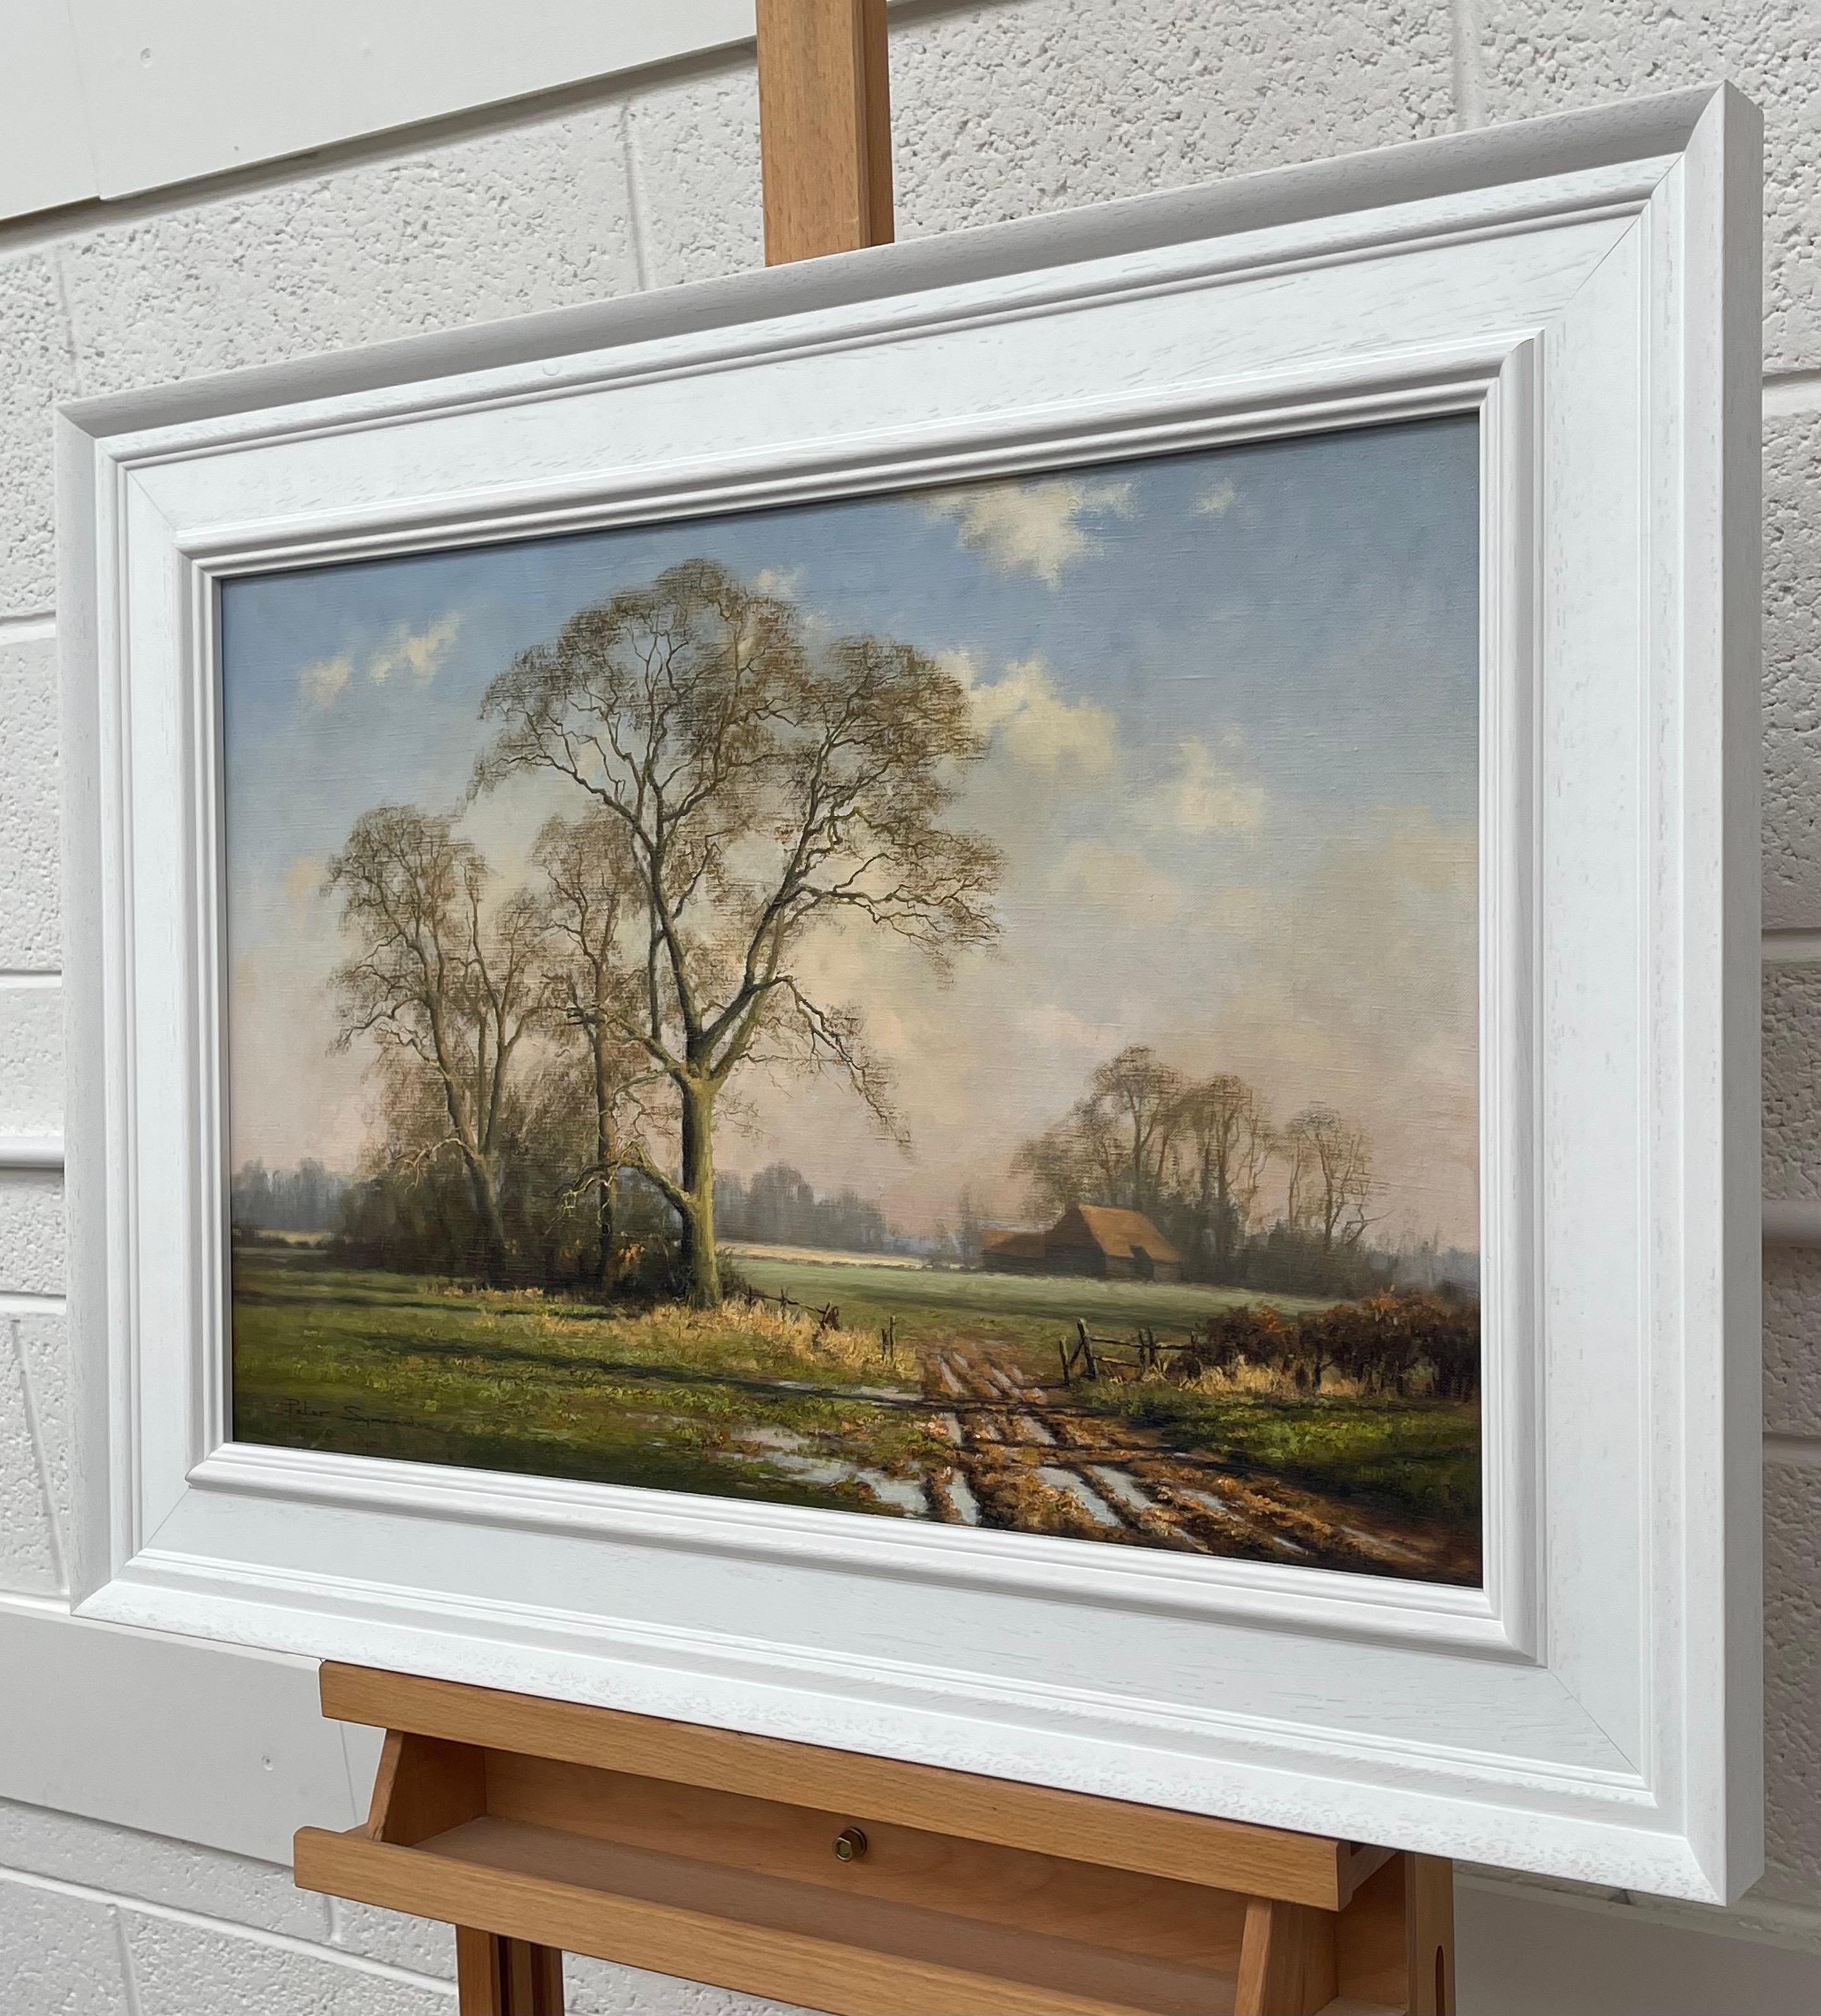 Oil painting of Rural Winter Scene with Oak Trees in England by Contemporary British Artist, Peter Symonds 

Art measures 24 x 16 inches
Frame measures 30 x 22 inches

Peter Symonds is a leading landscape painter specializing in paintings of the